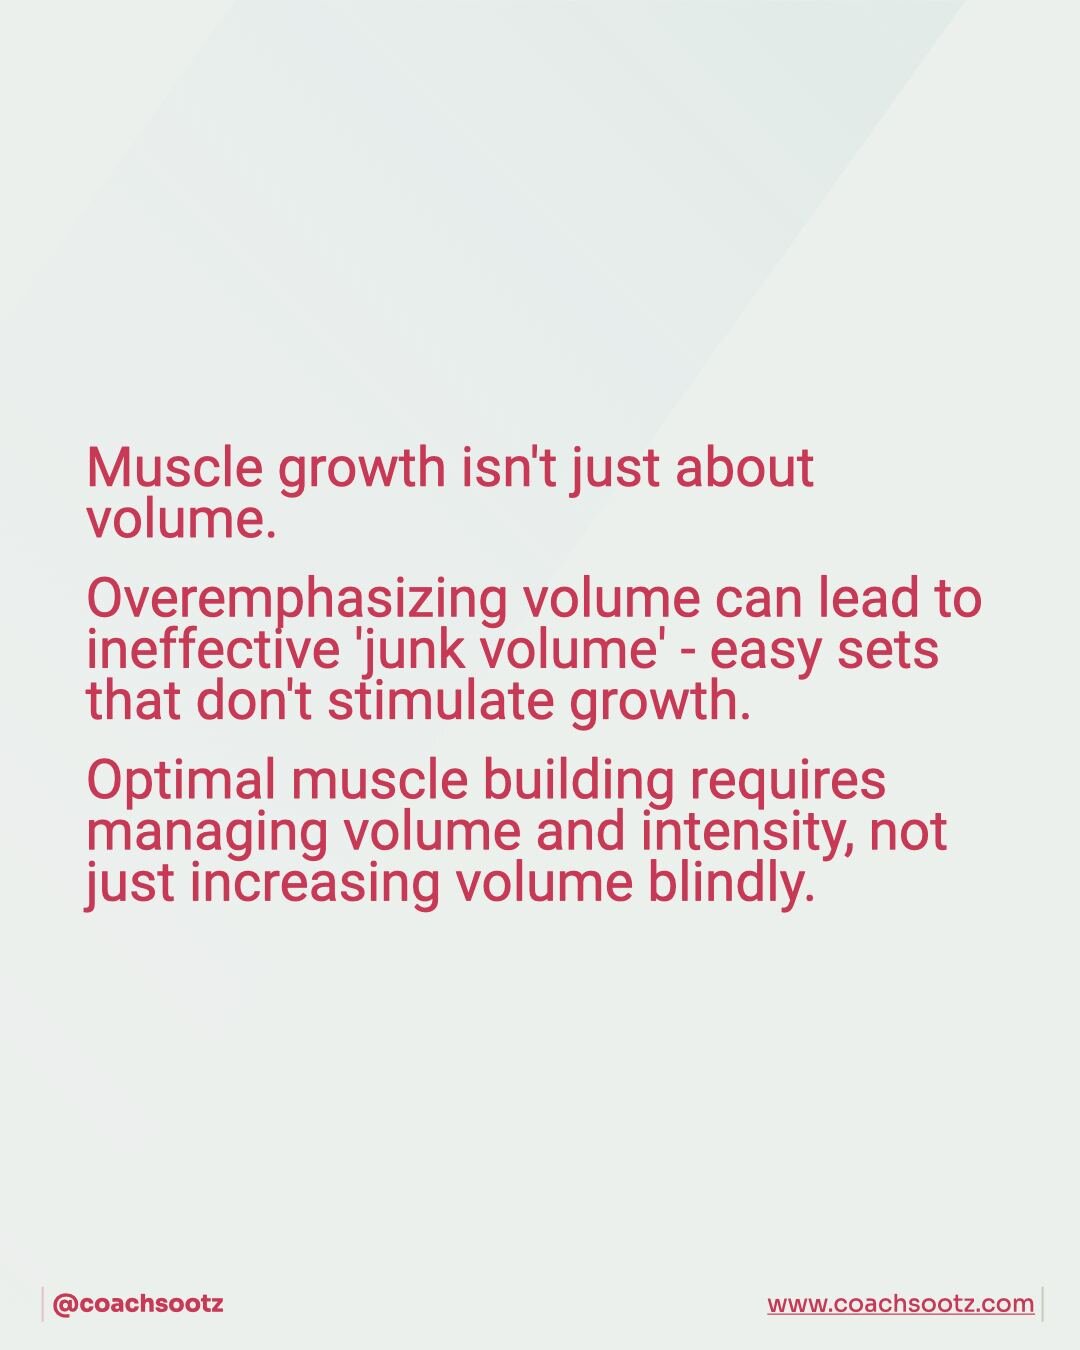 Muscle growth is not solely determined by volume. 

Placing excessive emphasis on volume can result in the accumulation of ineffective 'junk volume' - sets that are too easy and fail to sufficiently stimulate muscle growth. 

Instead, achieving an op